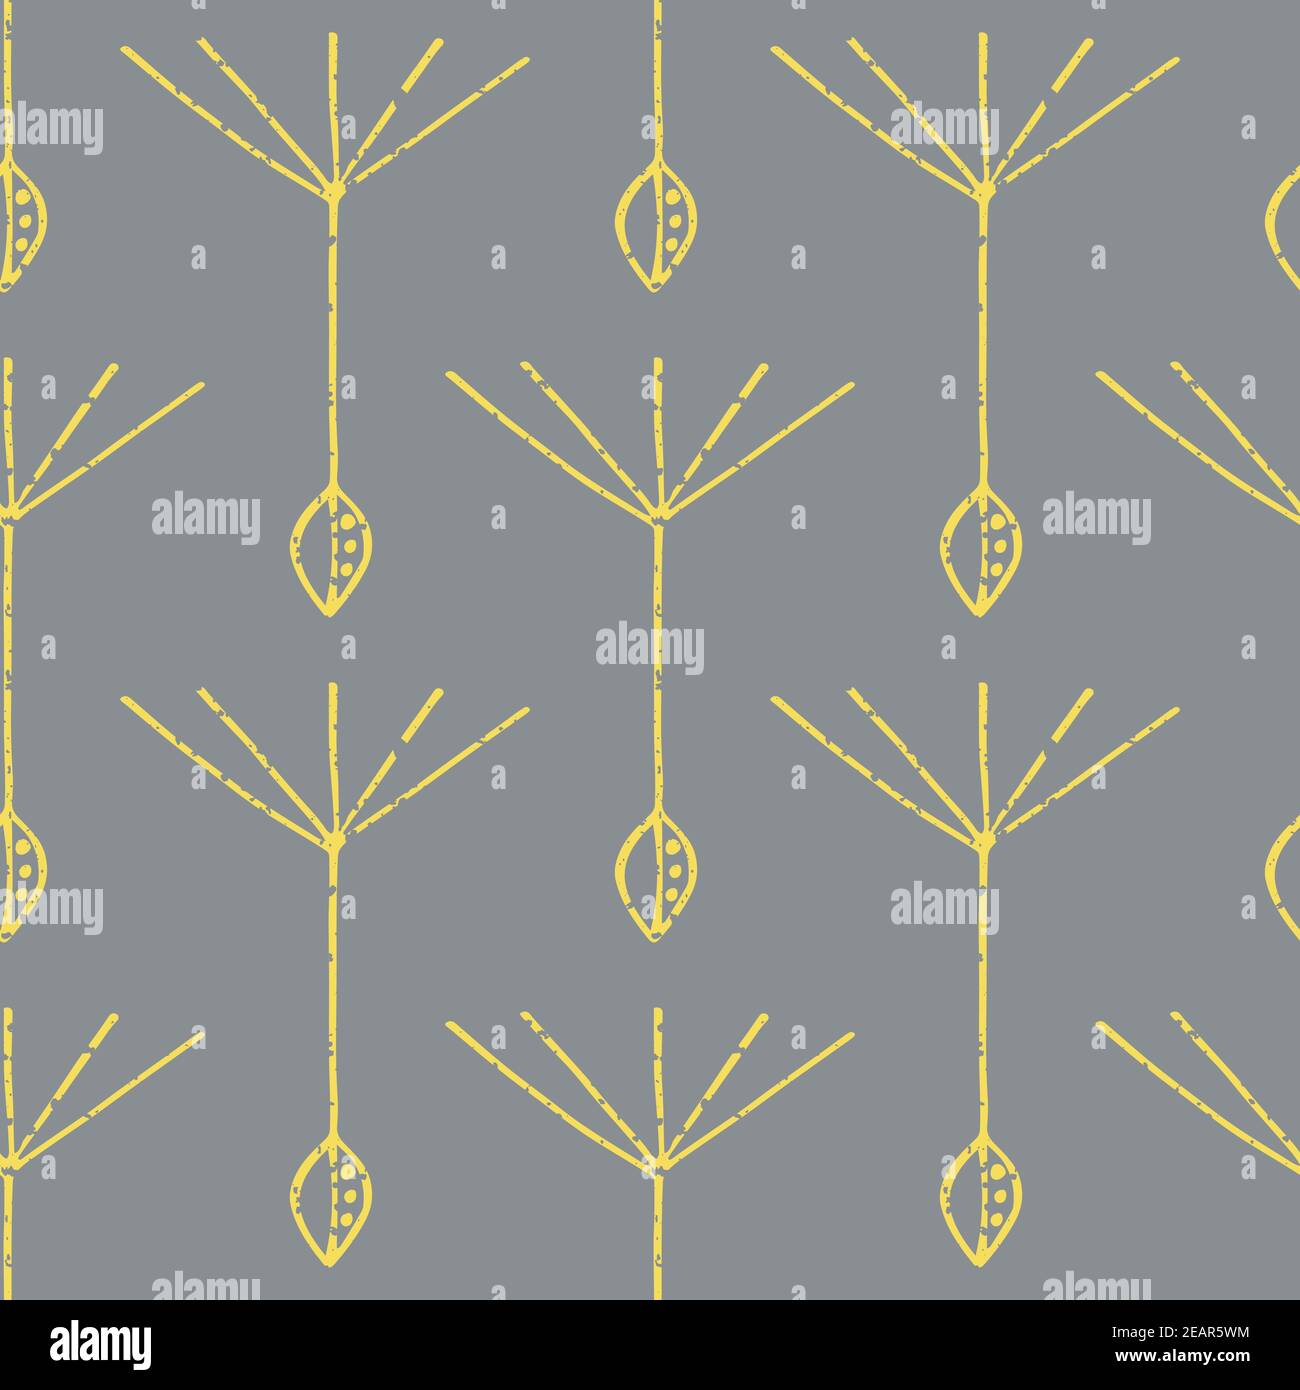 Dandelion seed seamless vector pattern background. Backdrop of abstract of floating herbacious flower seeds yellow grey backdrop. Stylised hand drawn Stock Vector